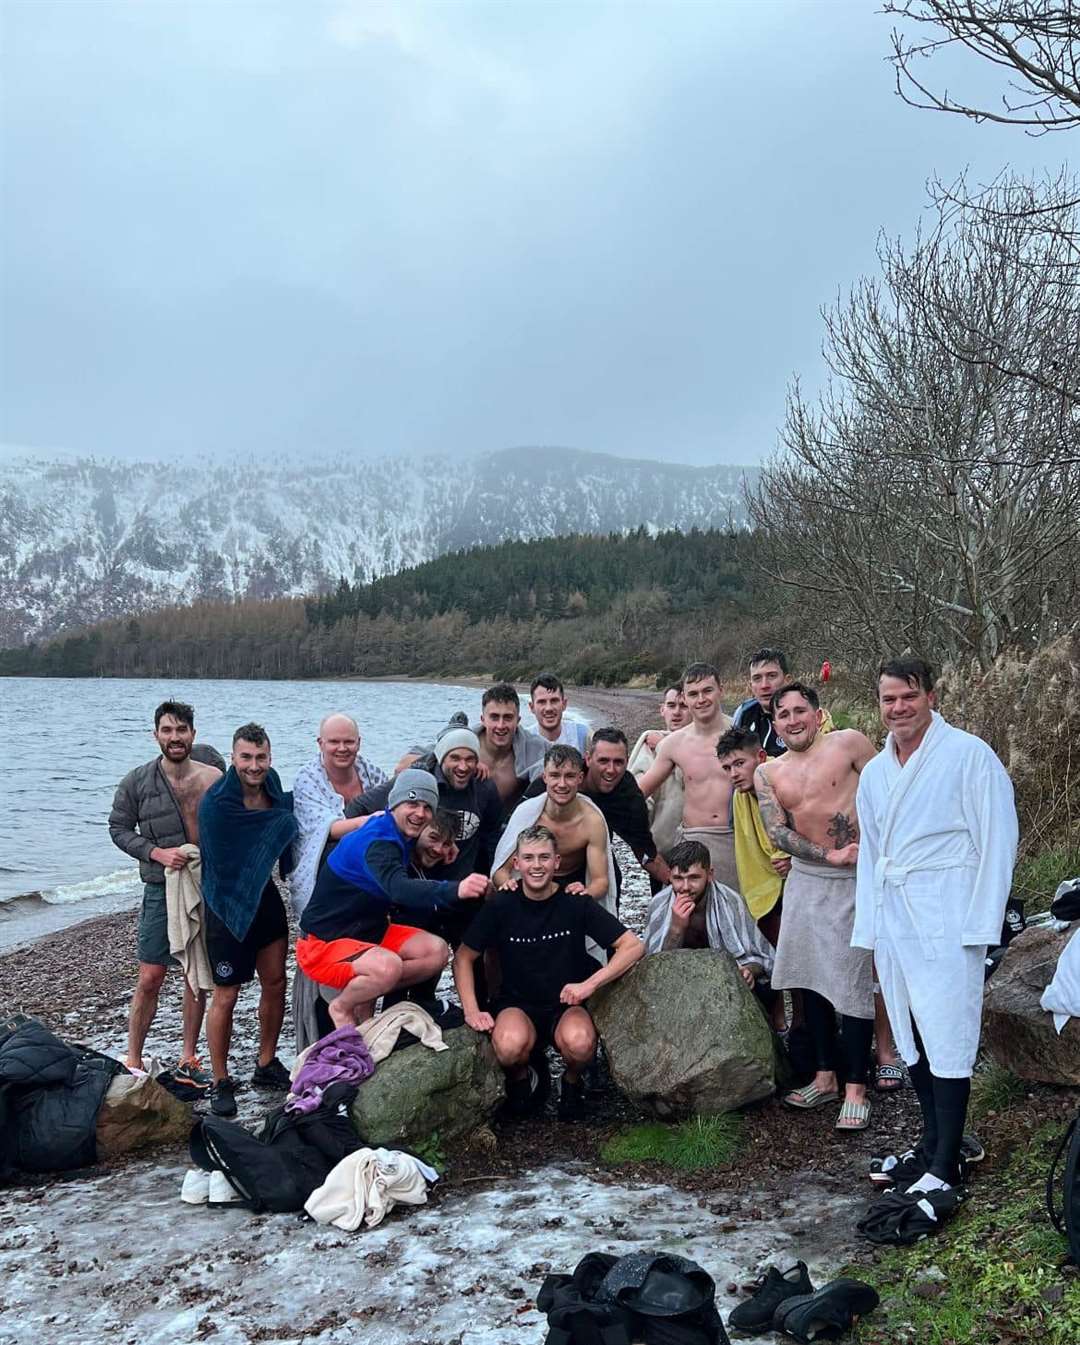 The players and staff “warmed up” for their Christmas Eve Players and Fans Dip with a dip in Loch Ness.